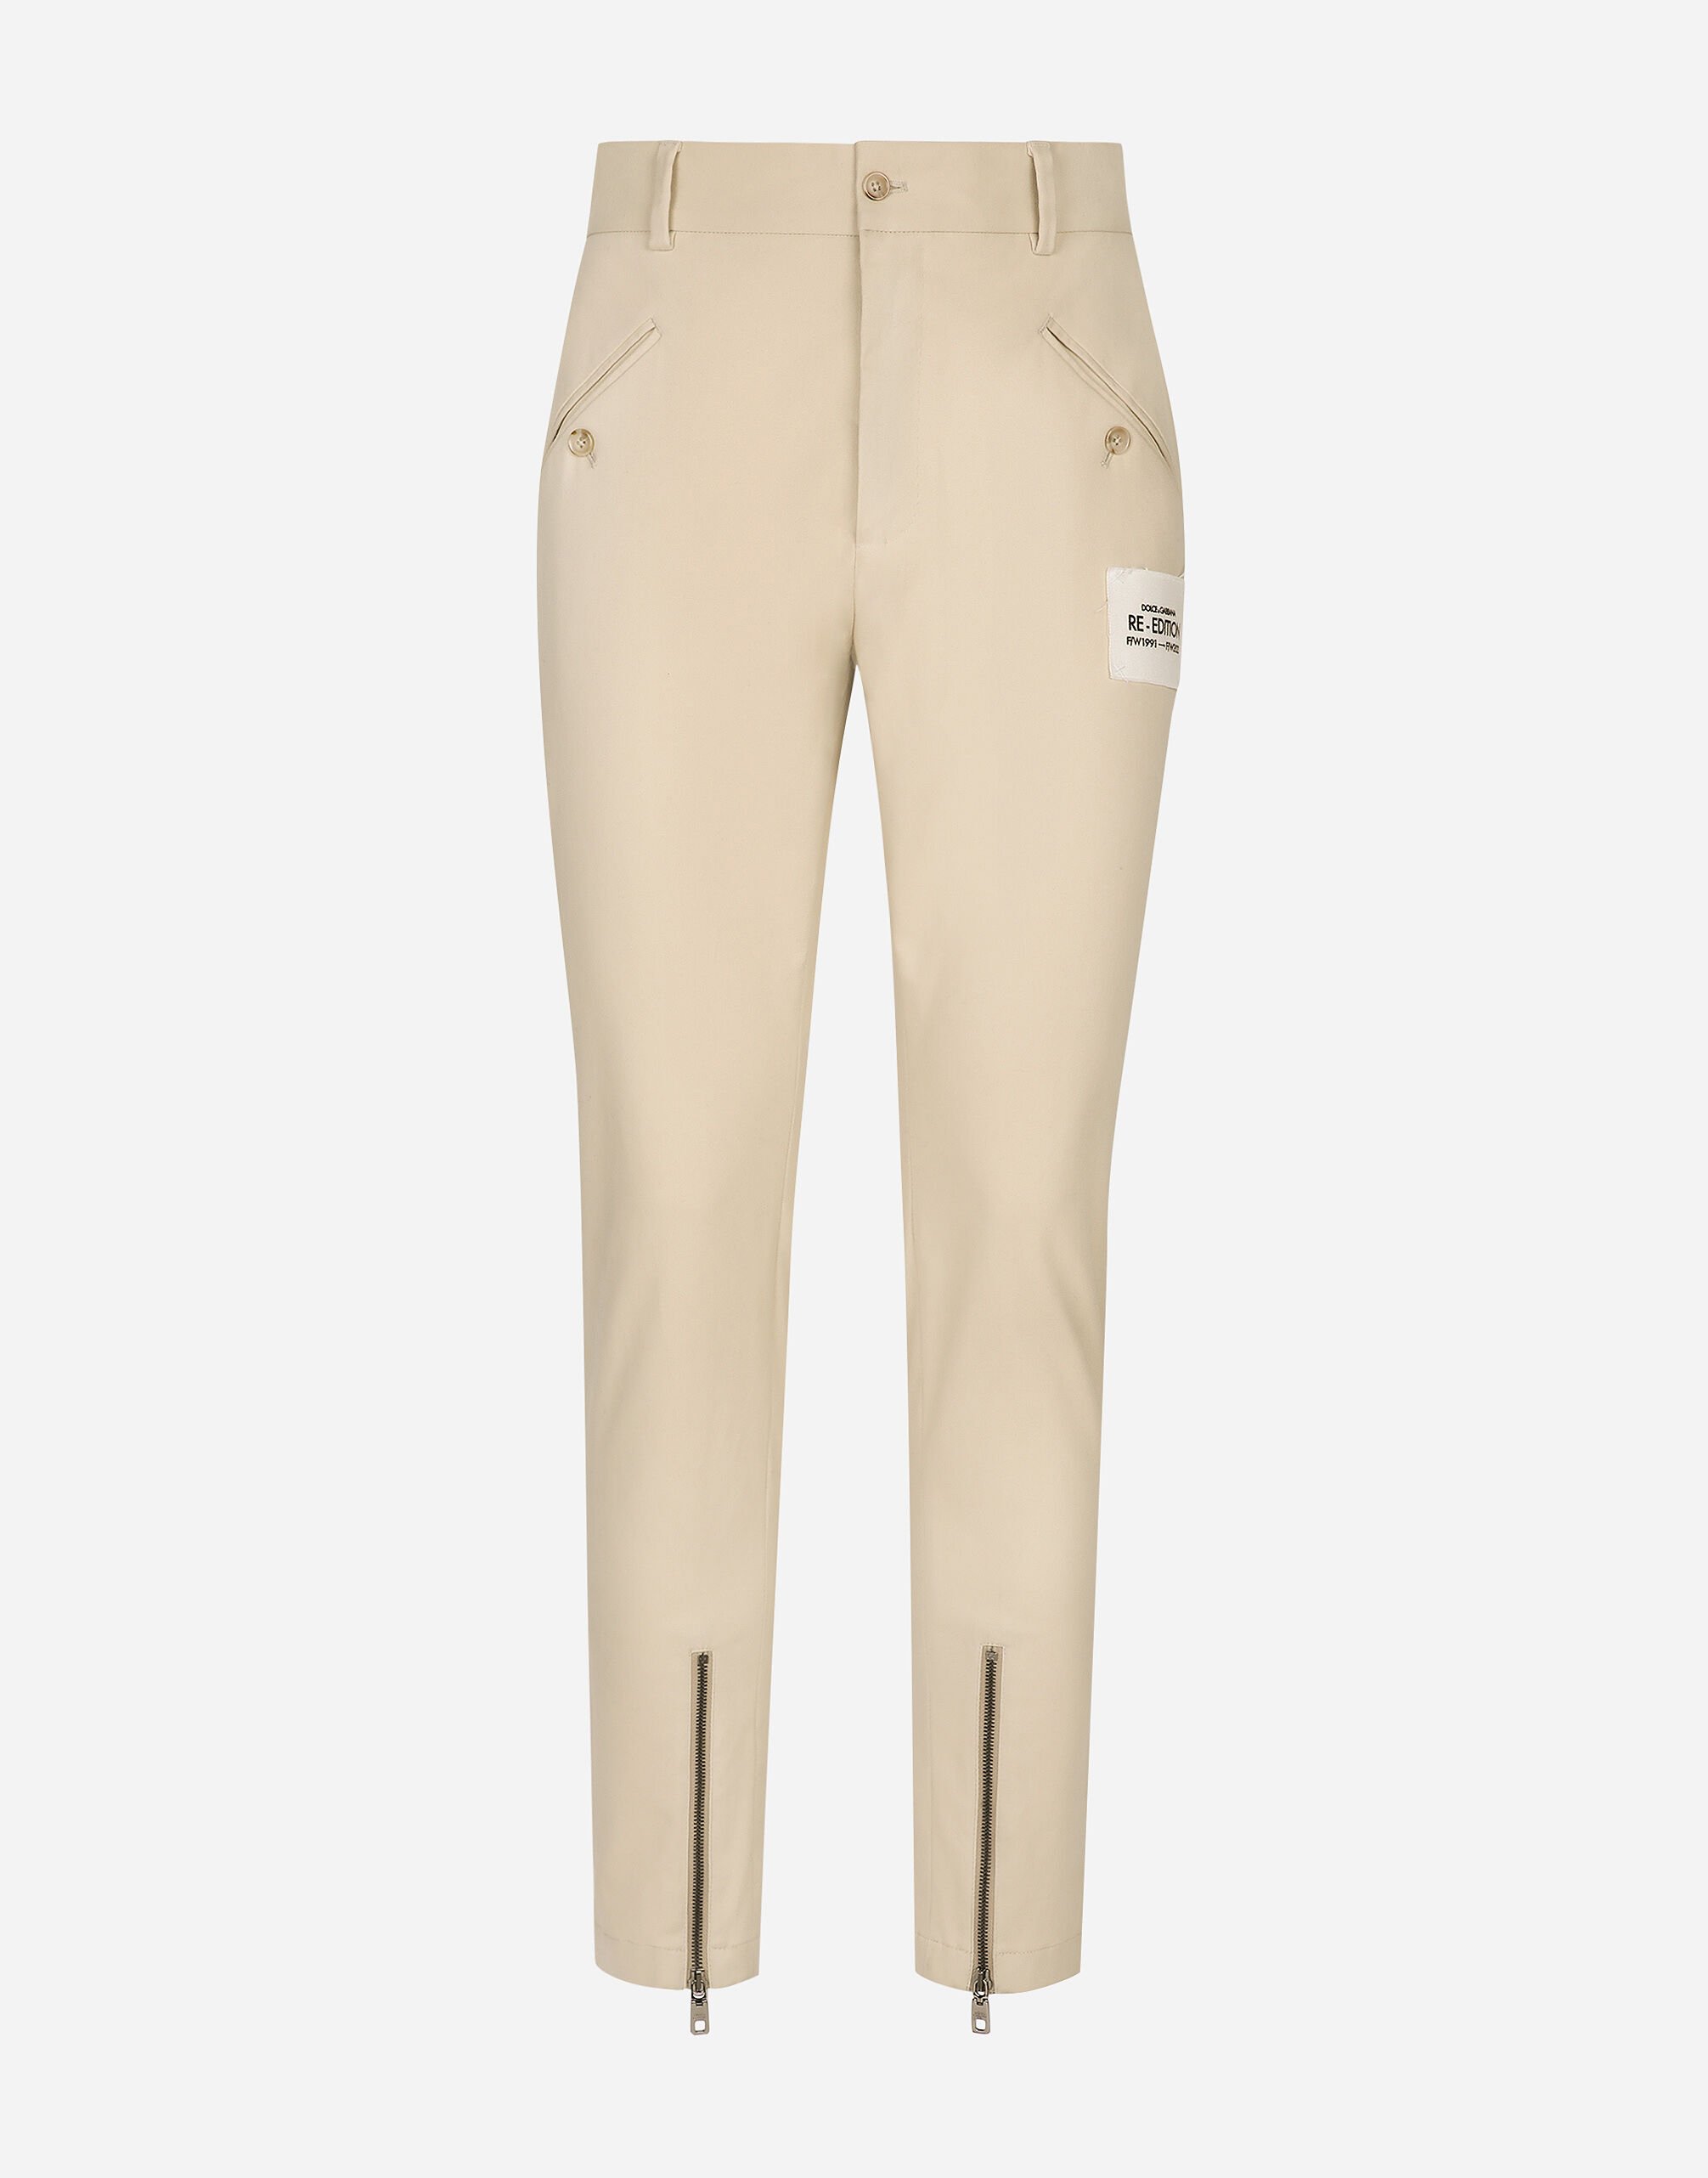 Dolce&Gabbana Stretch cotton pants with Re-Edition label Beige GV7CATFUFMY